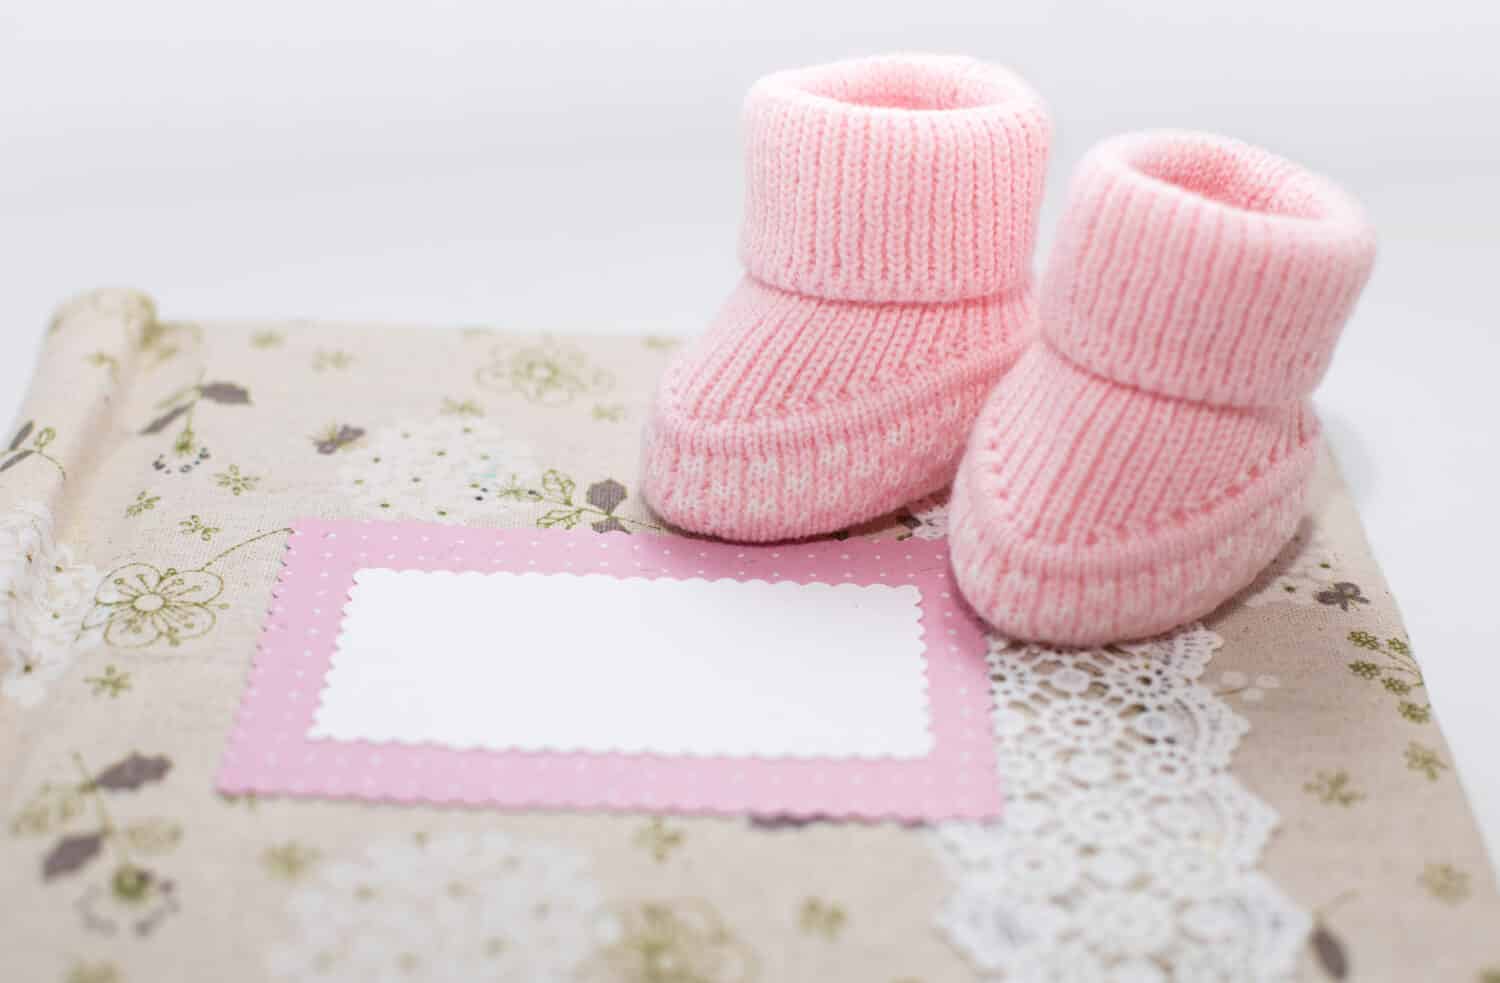 Pink newborn shoes on the album